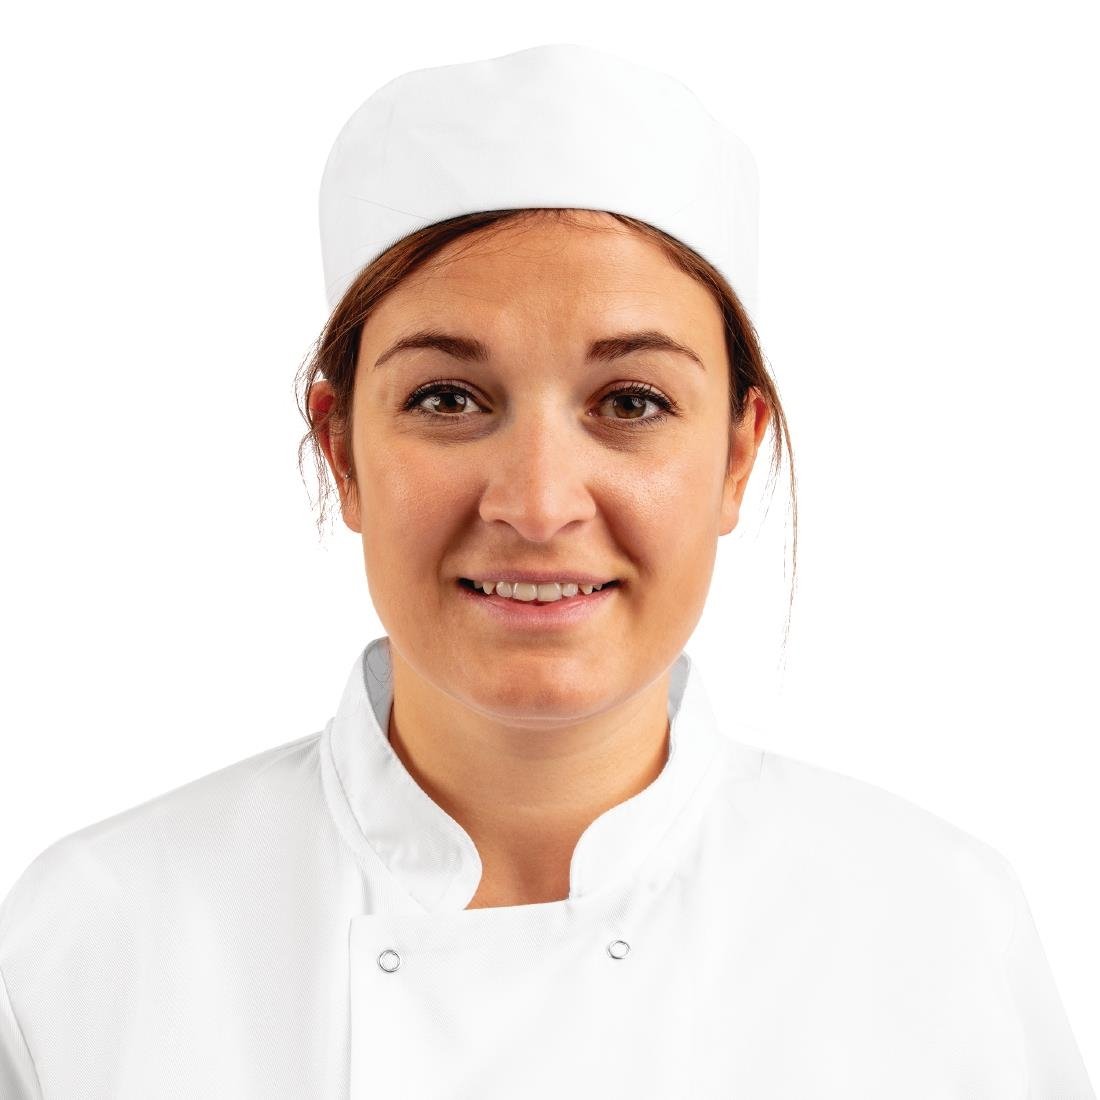 A203-S Whites Chefs Unisex Skull Cap Polycotton White - S JD Catering Equipment Solutions Ltd